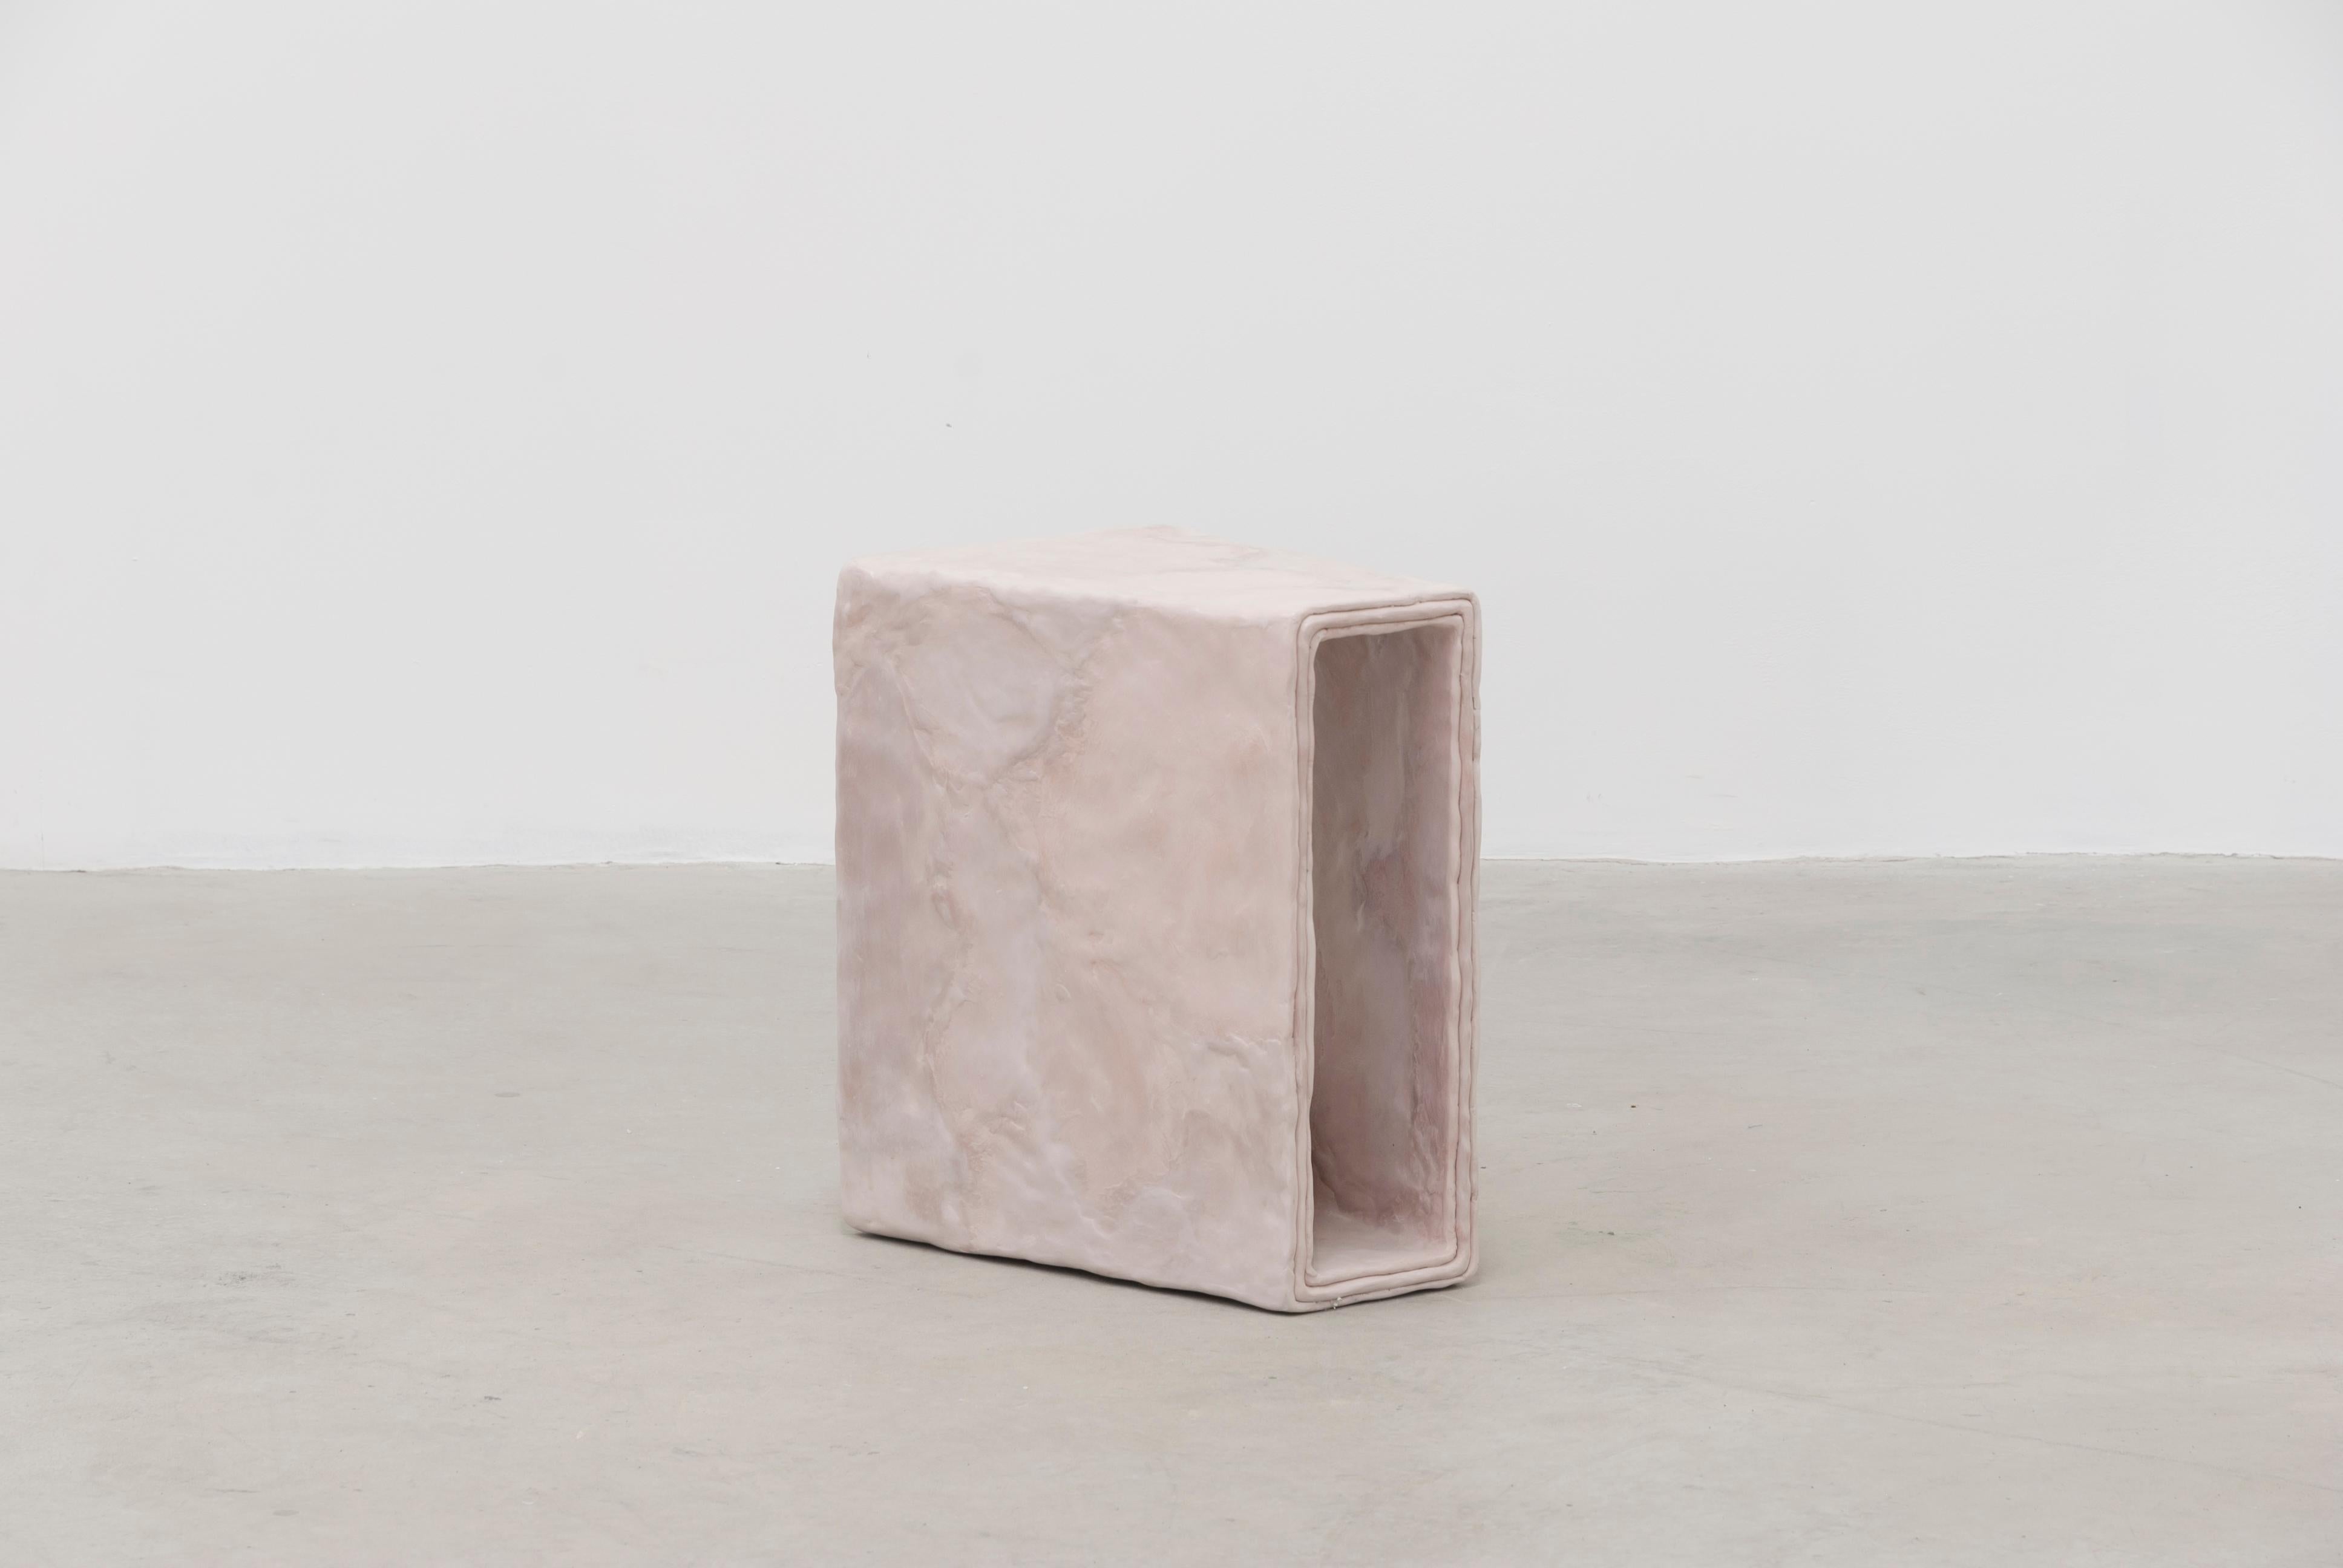 From the Plane collection - the Plane side table uses cement to create an unexpected, stone-like texture available in an array of pastel tones. Images shown in pink Plane.